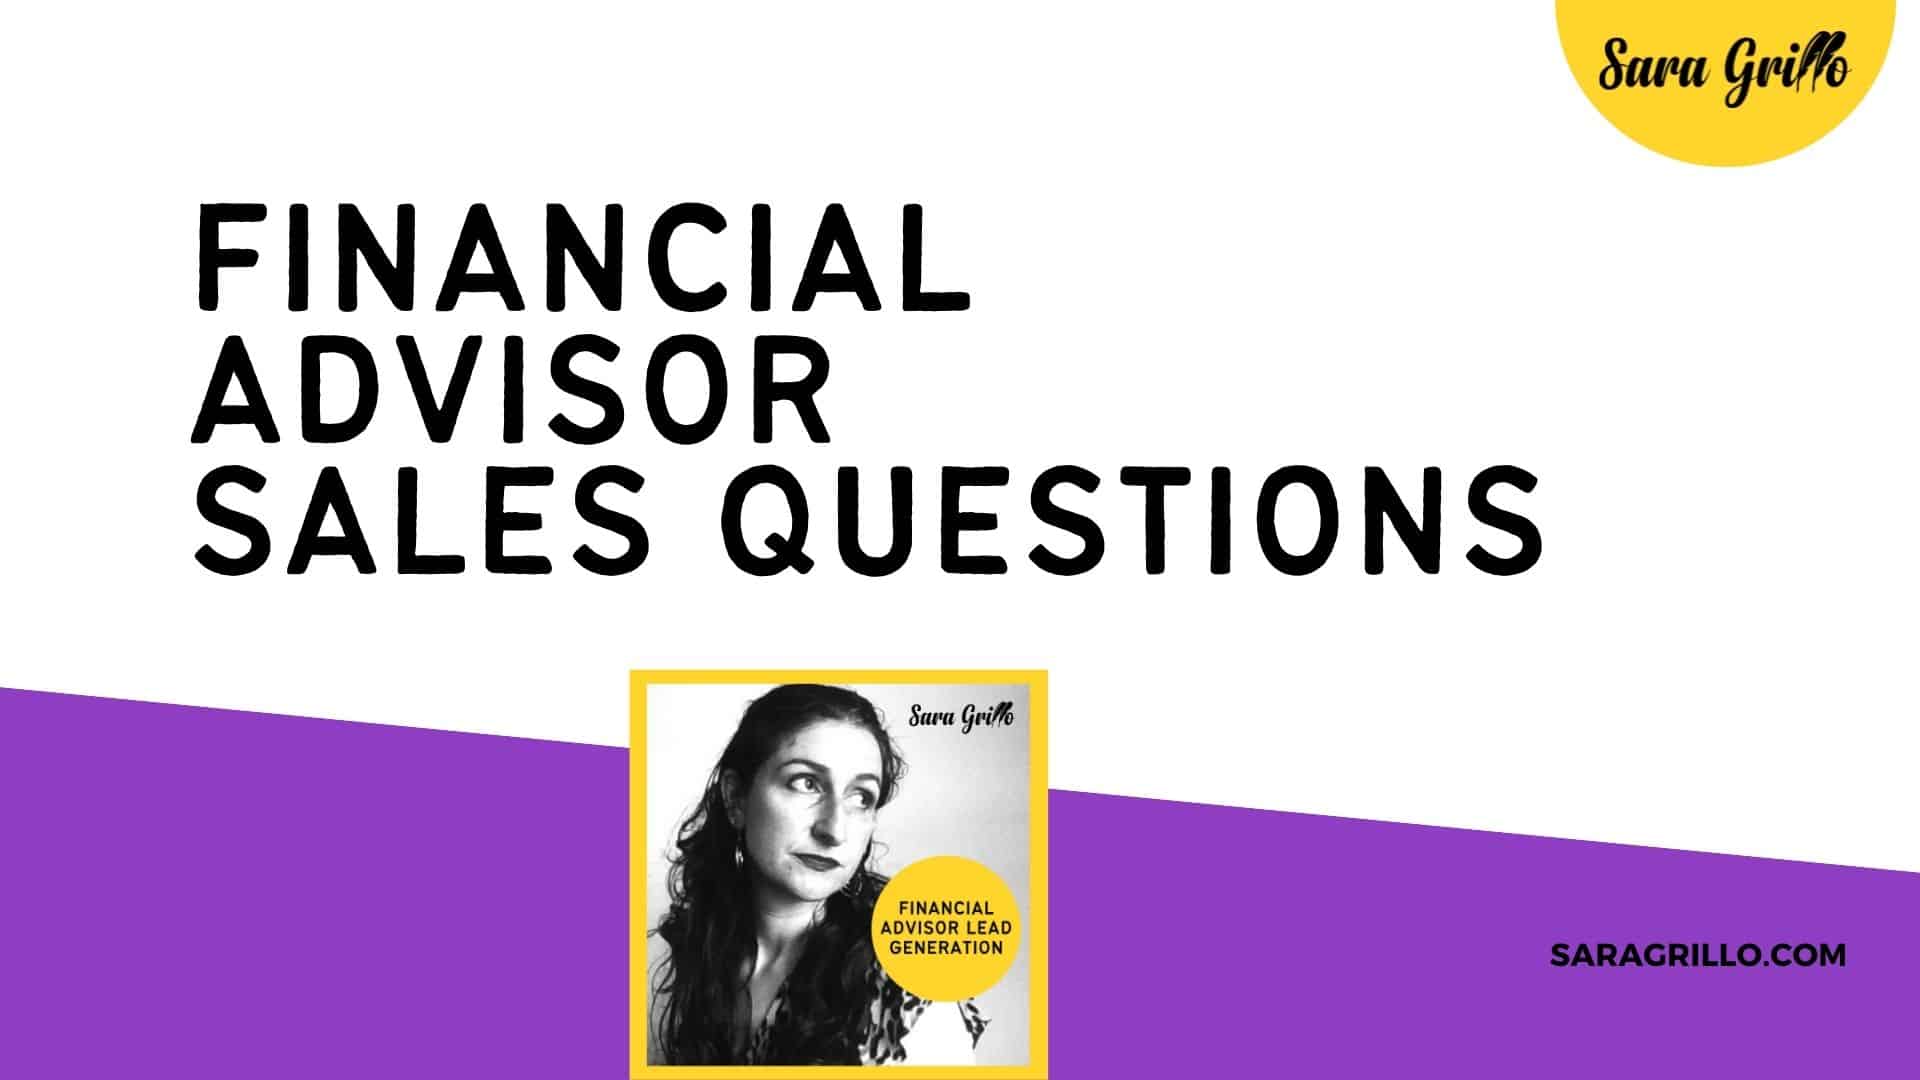 We discuss financial advisor sales questions that won't put pressure on the prospect!